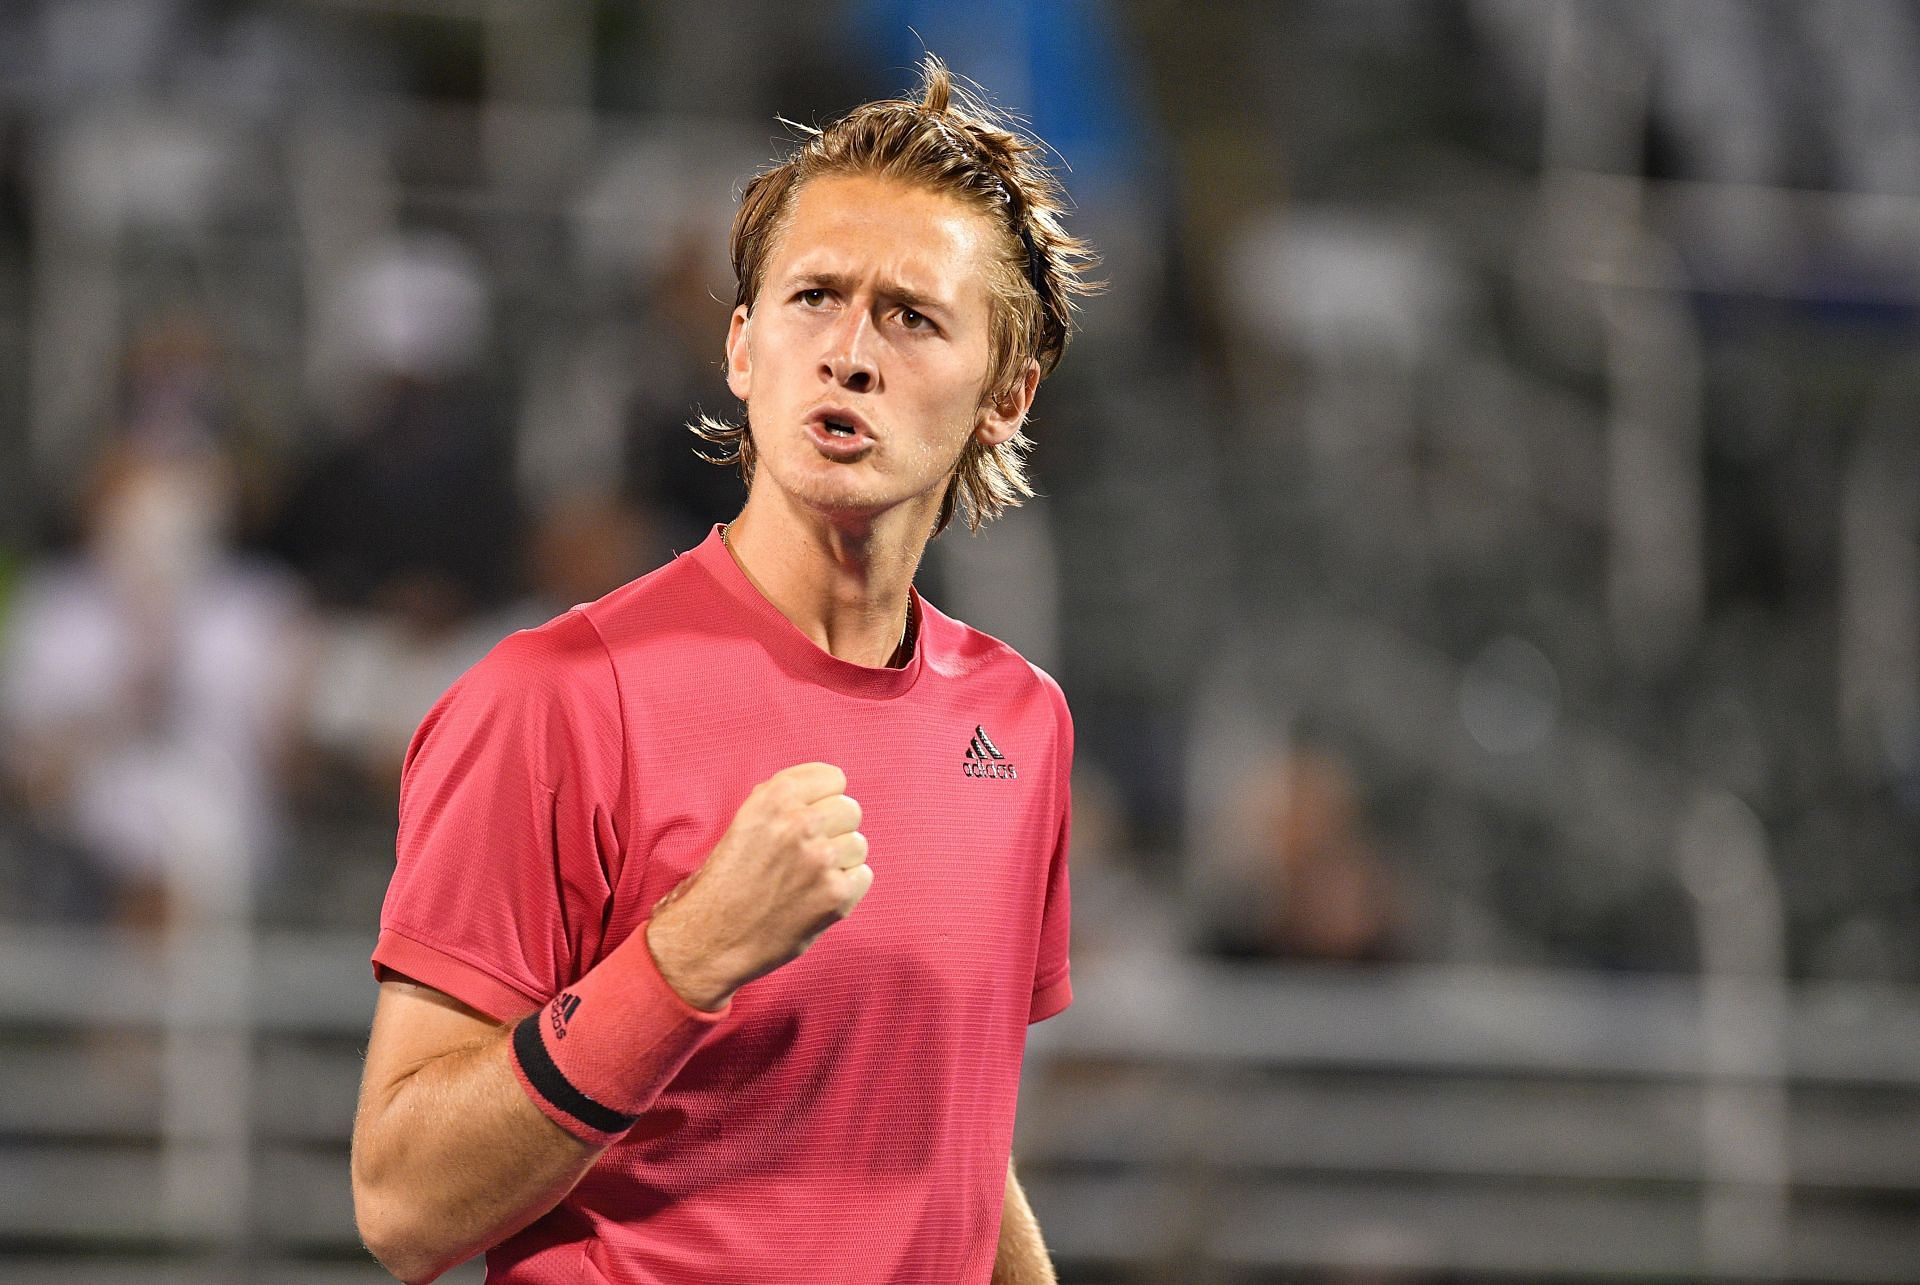 Sebastian Korda faces Cameron Norrie in a blockbuster first-round match at the Australian Open